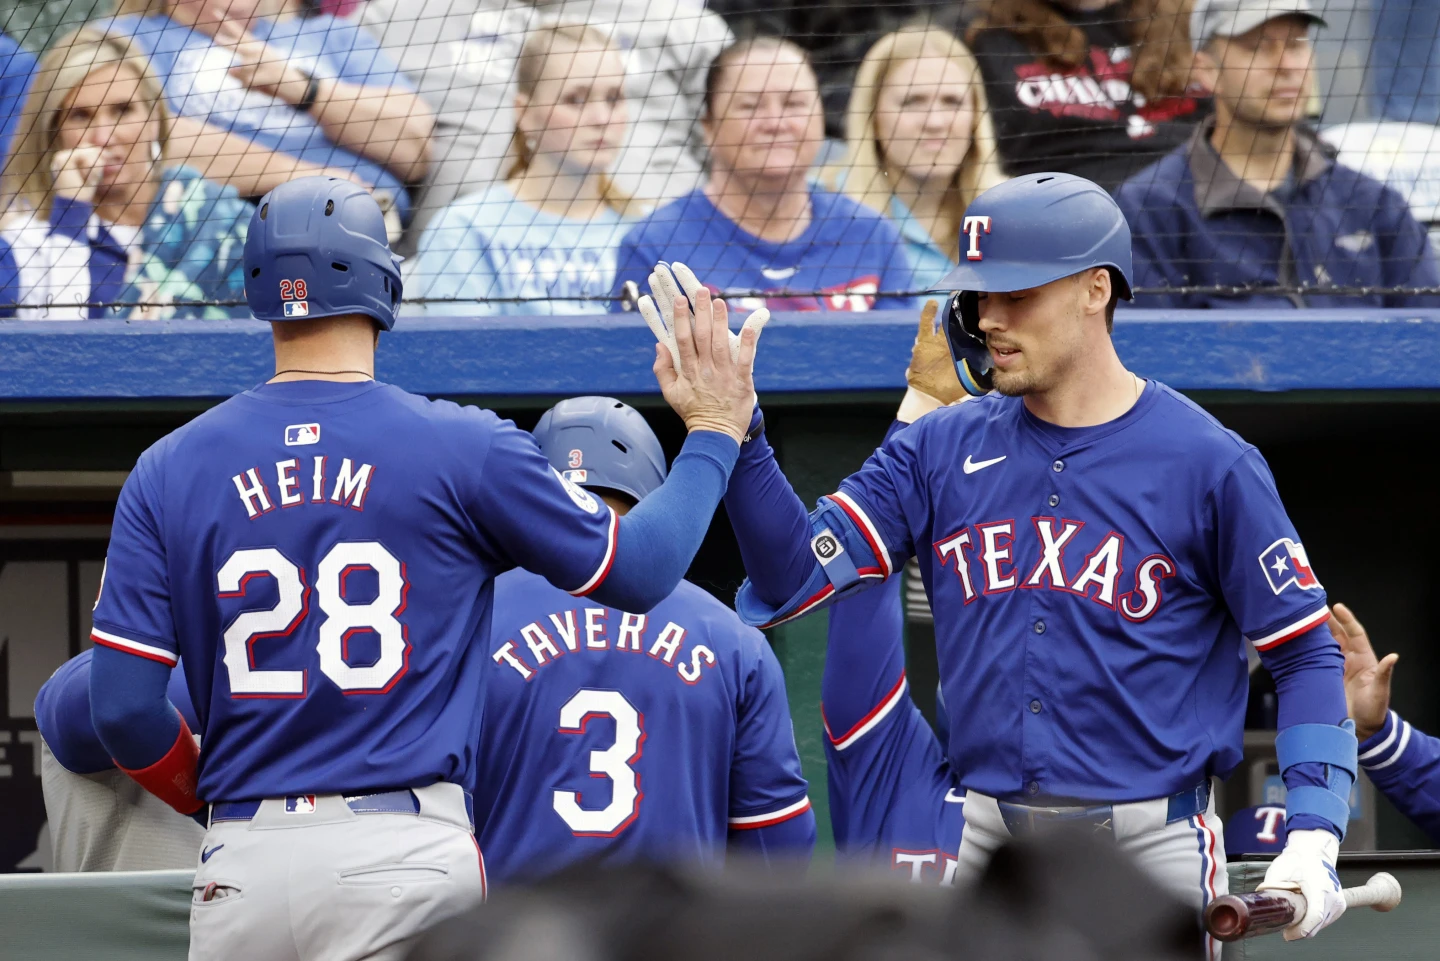 Lowe collects 4 hits as Texas Rangers defeat Kansas City Royals 15-4 - Sports Al Dente